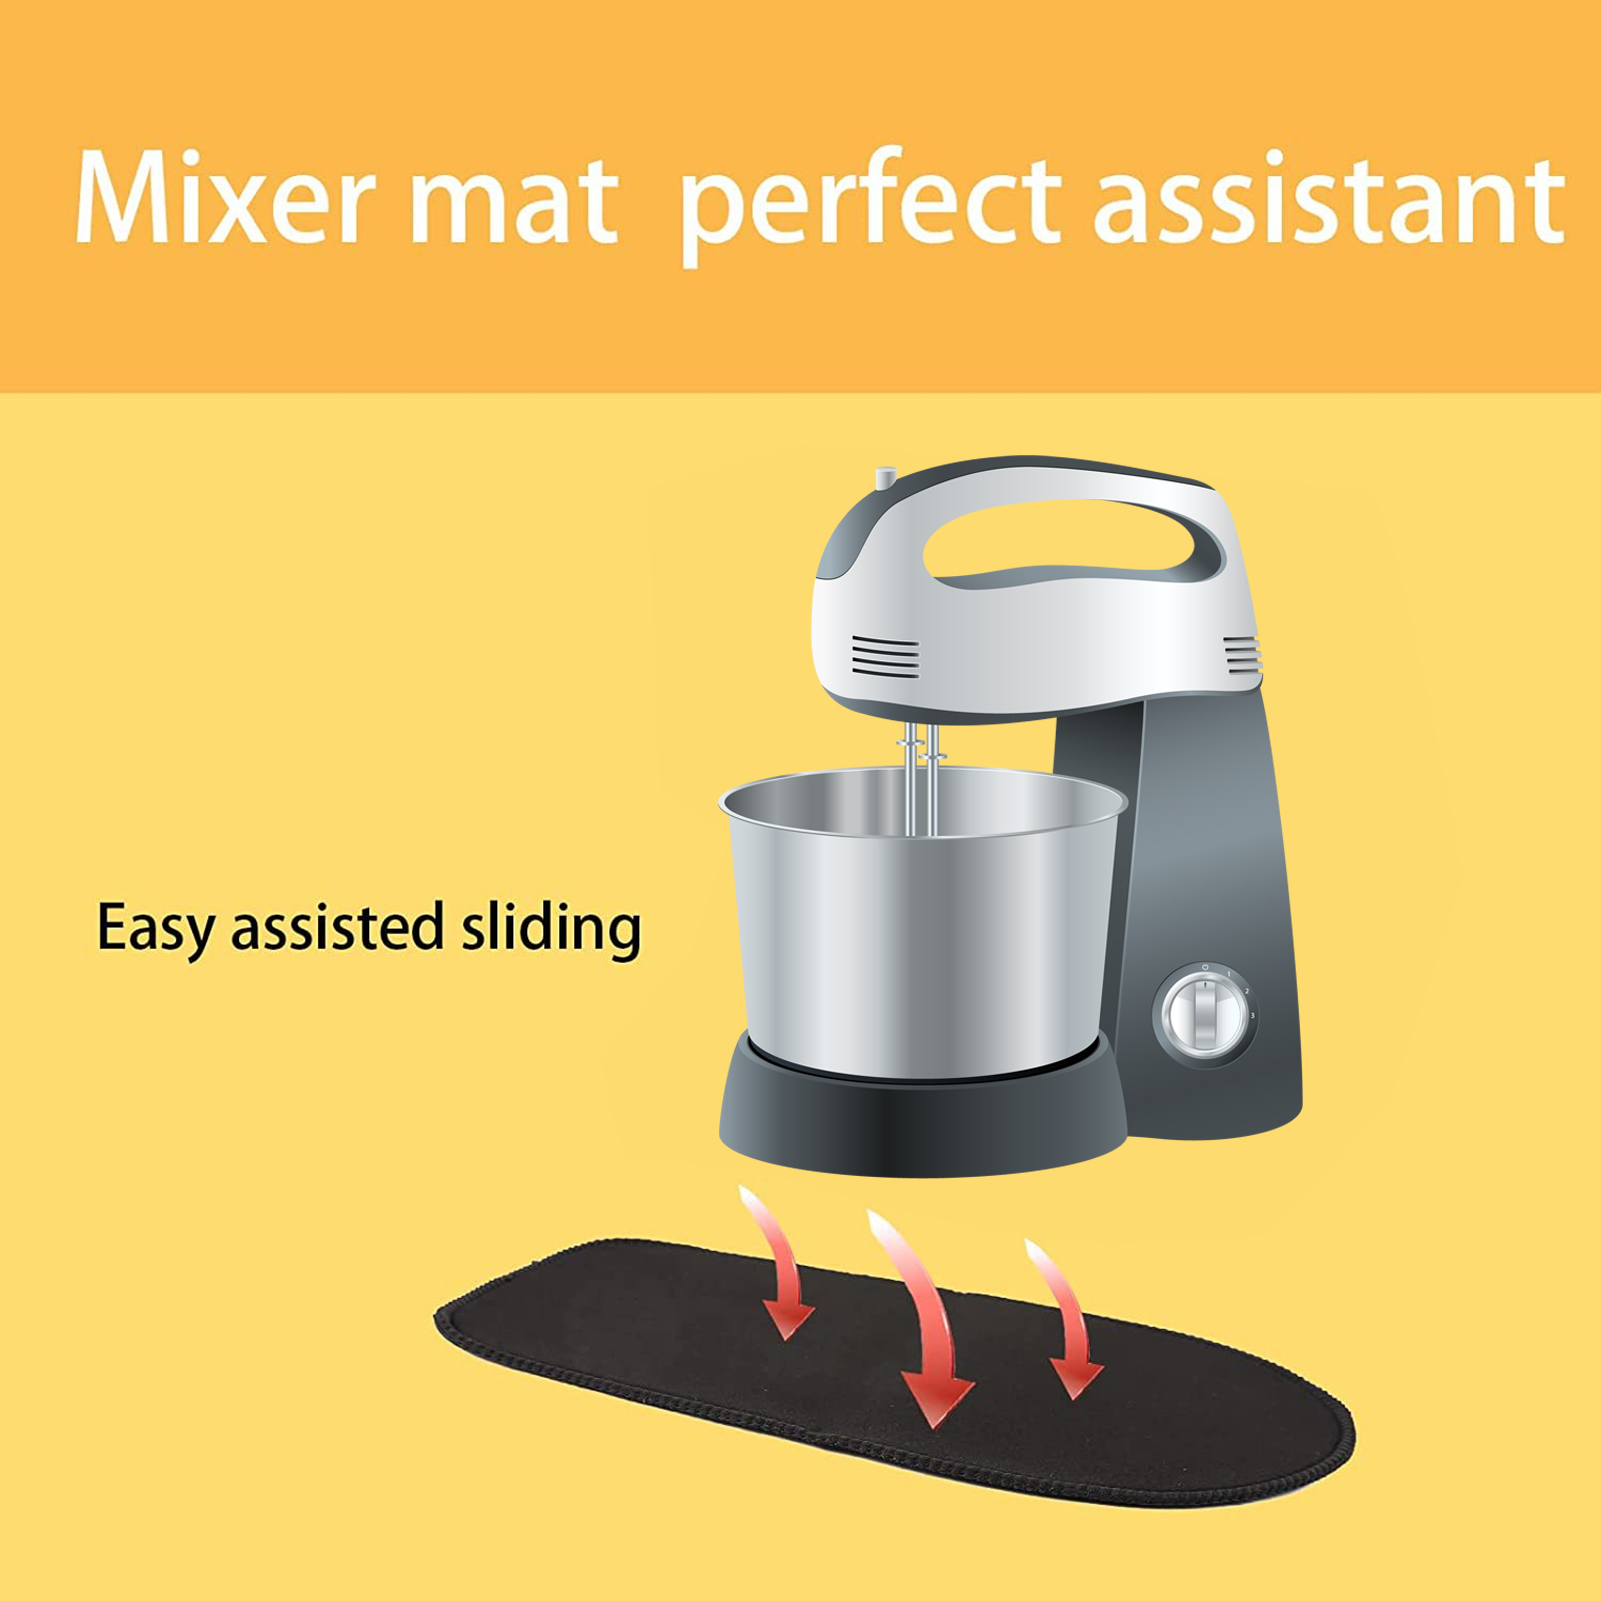 Travelwant Mixer Mover for Stand Mixer Mixer Slider Mat Kitchen Appliance Mats Compatible with 4 5 5 Qt Tilt Head Stand Mixer Artisan Tilt Head Mixer - image 5 of 6